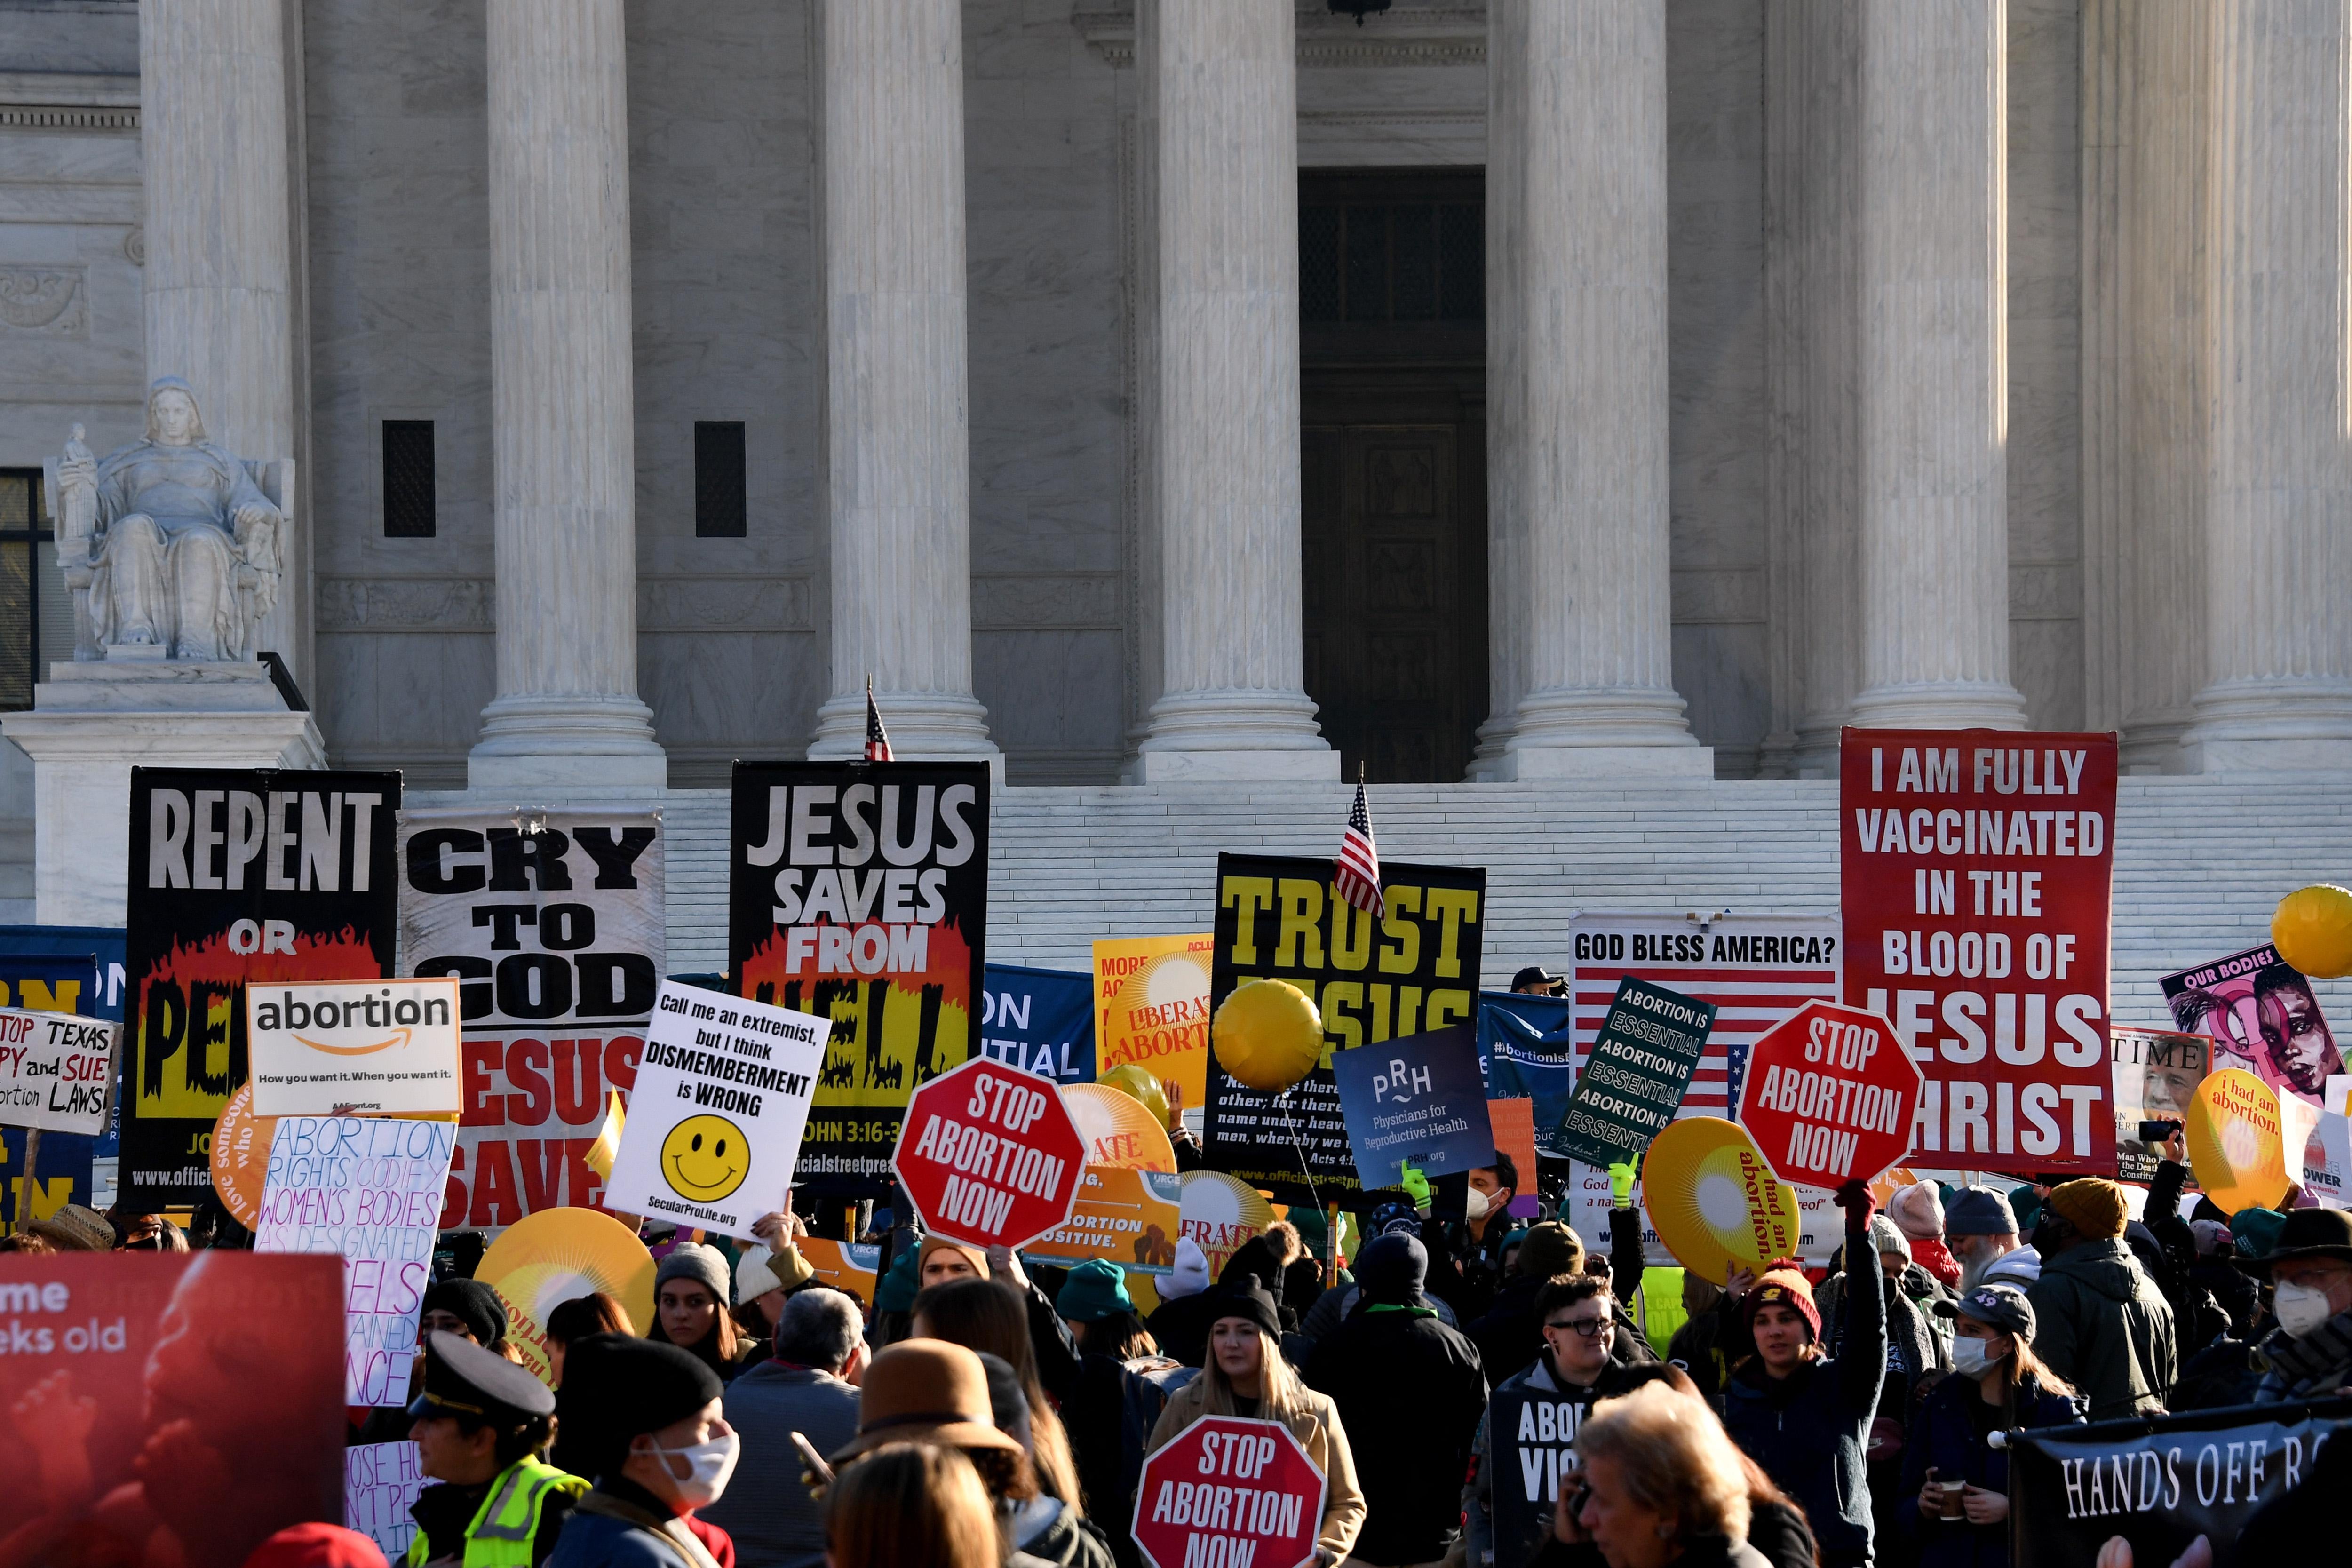 A crowd of people in front of the court steps holding signs with slogans such as "I am fully vaccinated in the blood of Jesus Christ," "Stop abortion now," and "Trust Jesus"